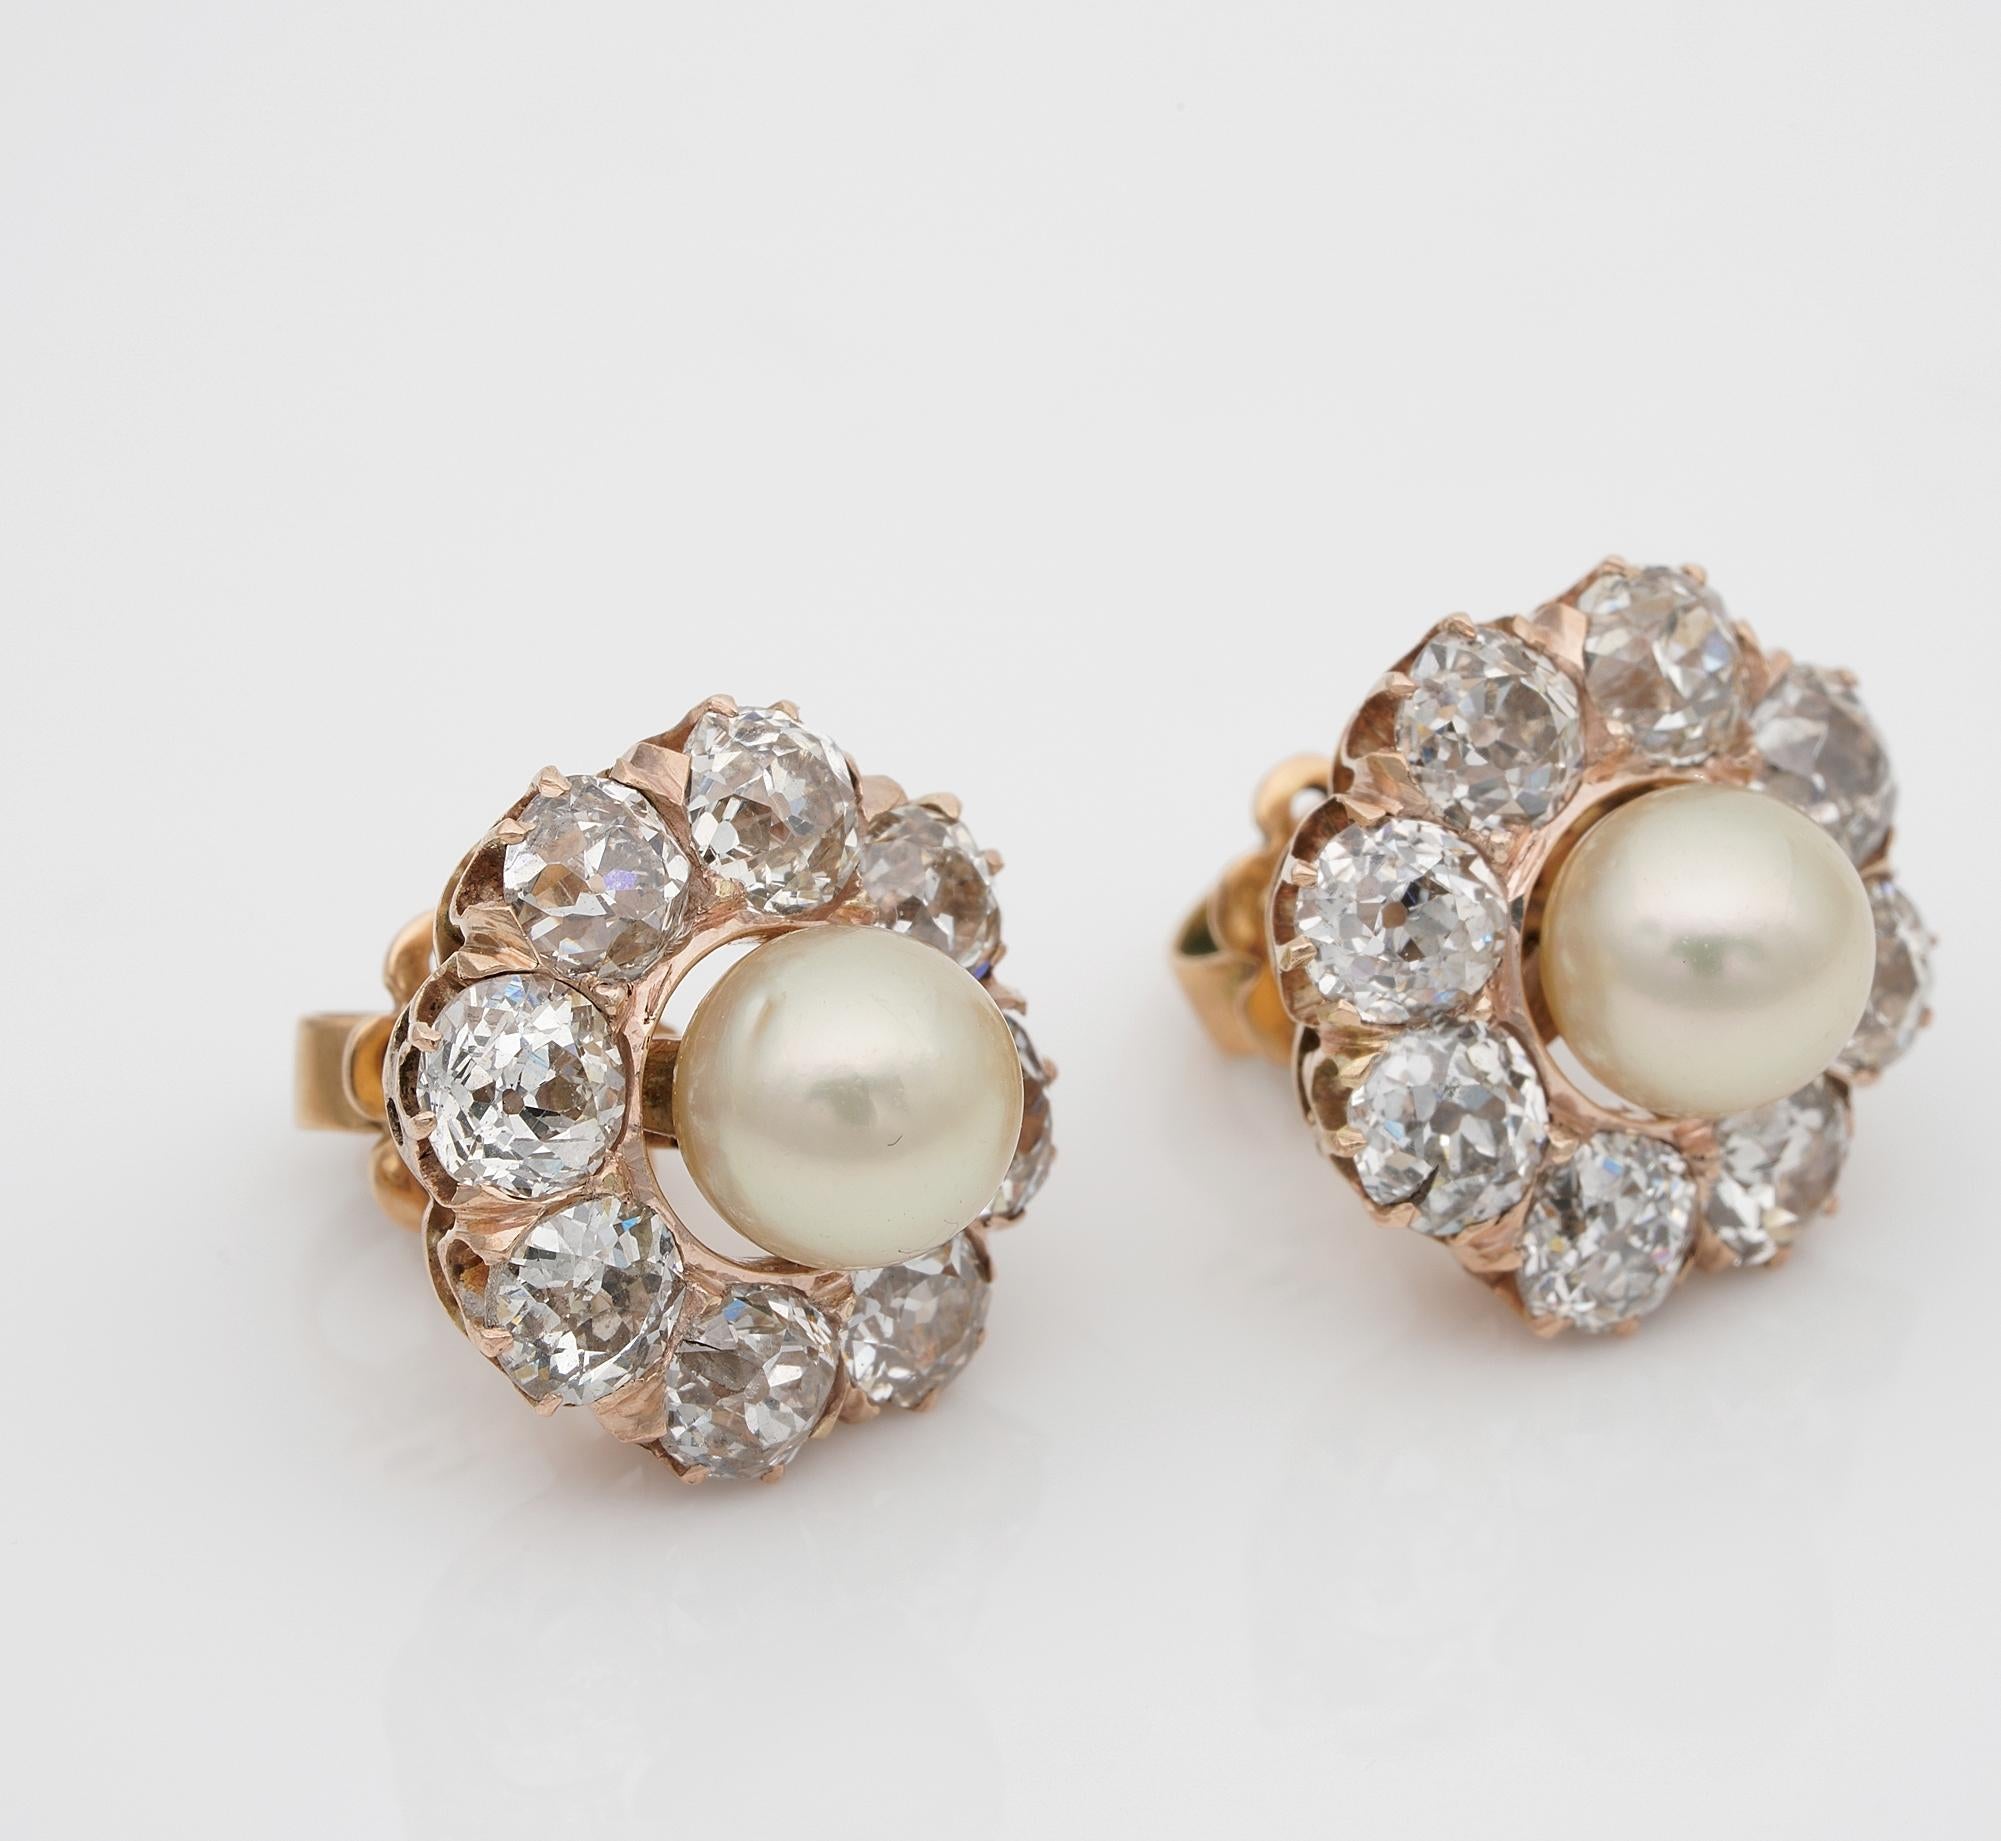 Old European Cut Victorian Natural Pearl 4.80 Carat Old Cut Diamond Earrings For Sale